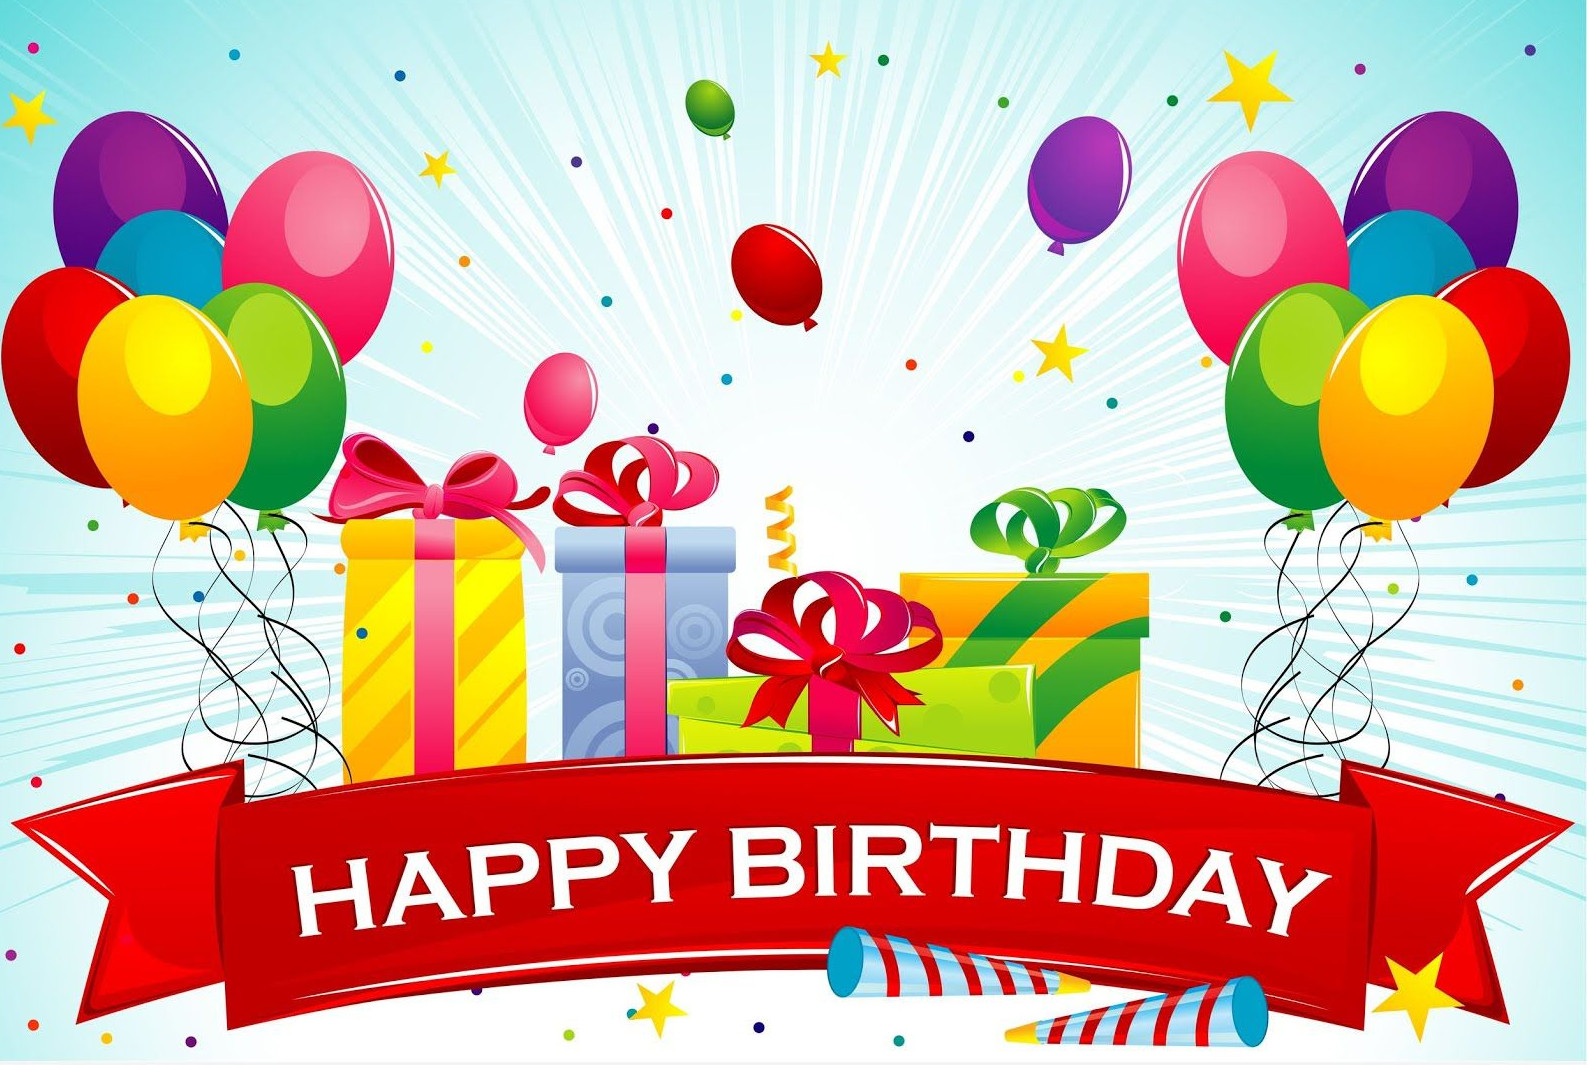 Internet Birthday Cards
 35 Happy Birthday Cards Free To Download – The WoW Style